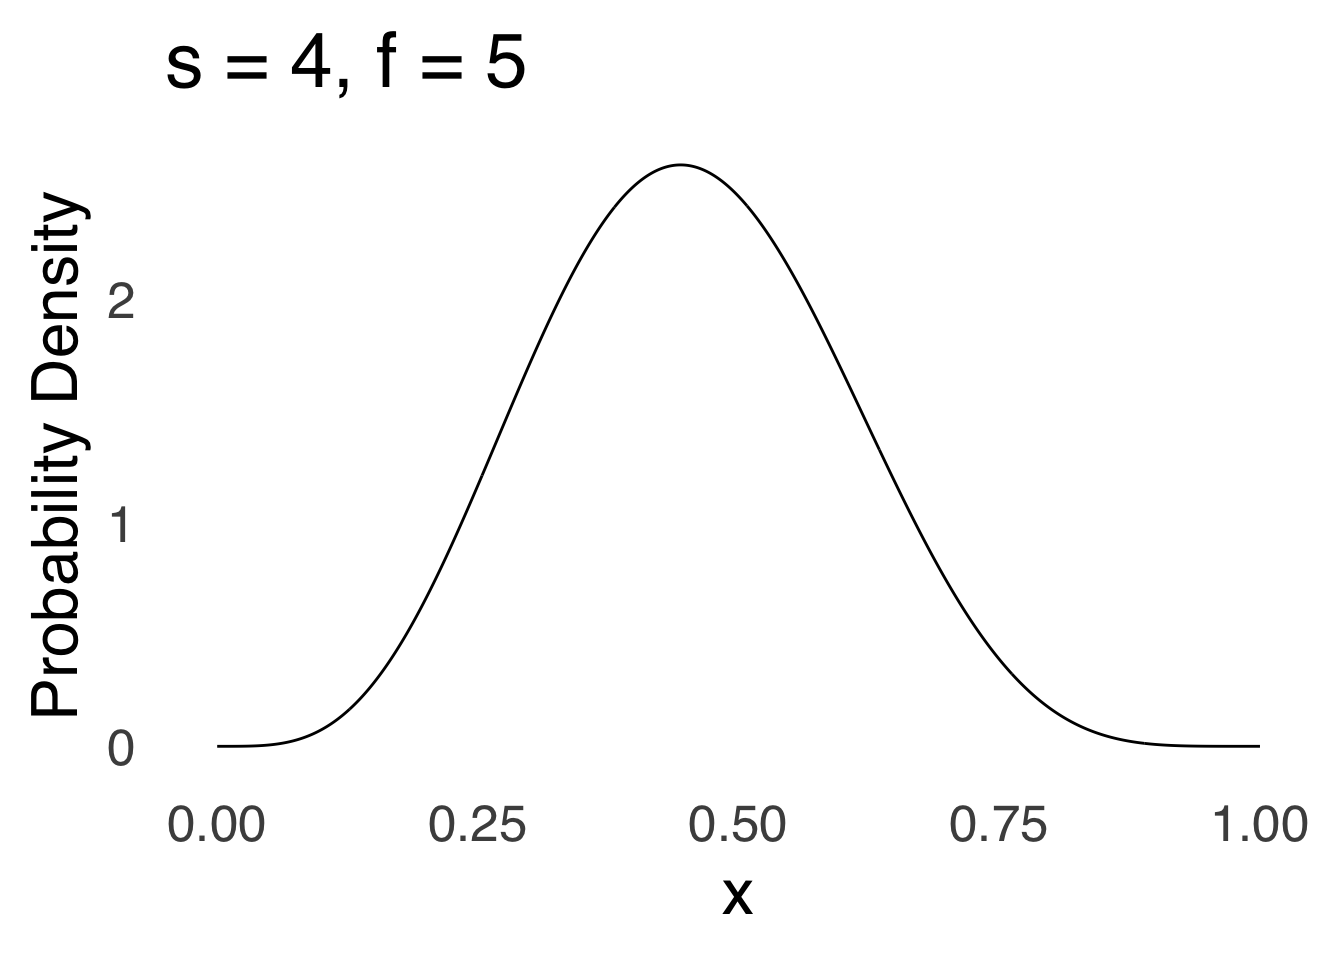 A $\beta$ Distribution with $s=4, f=5$